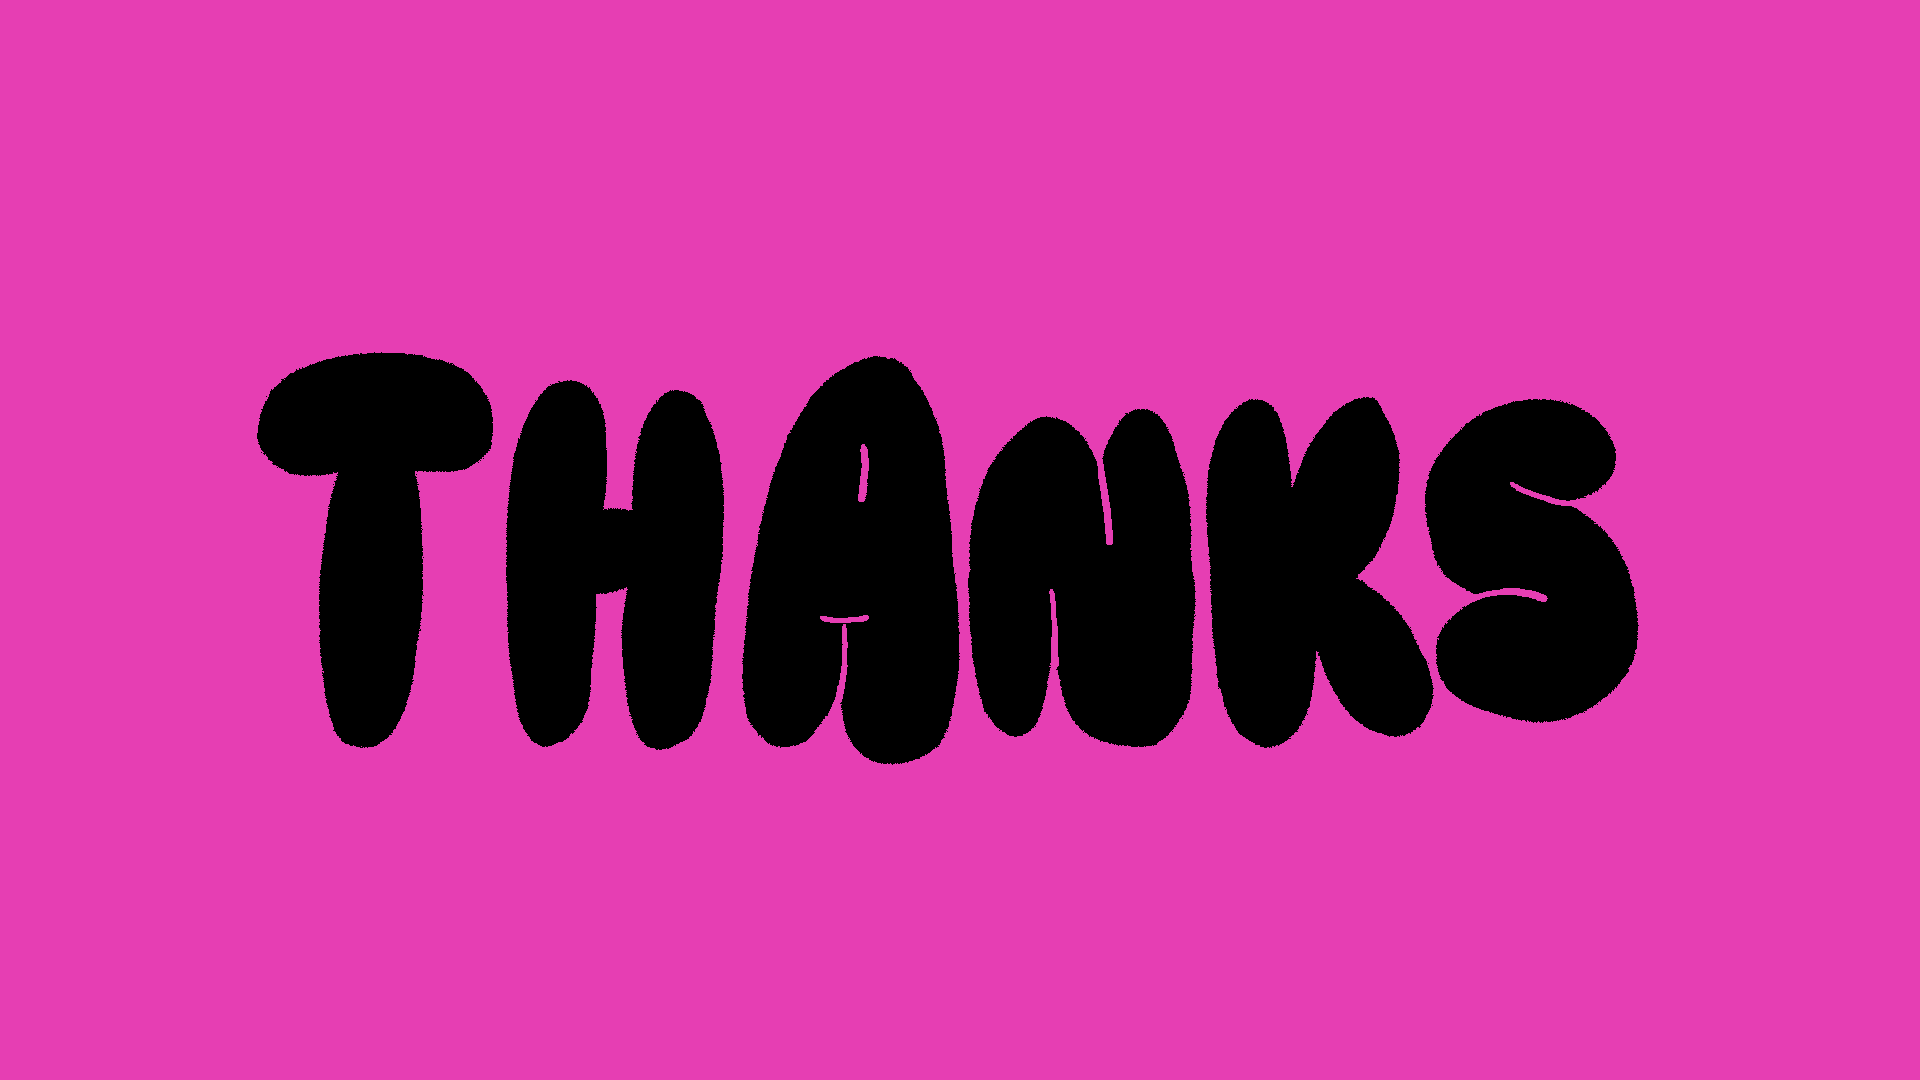 Image result for thanks gif